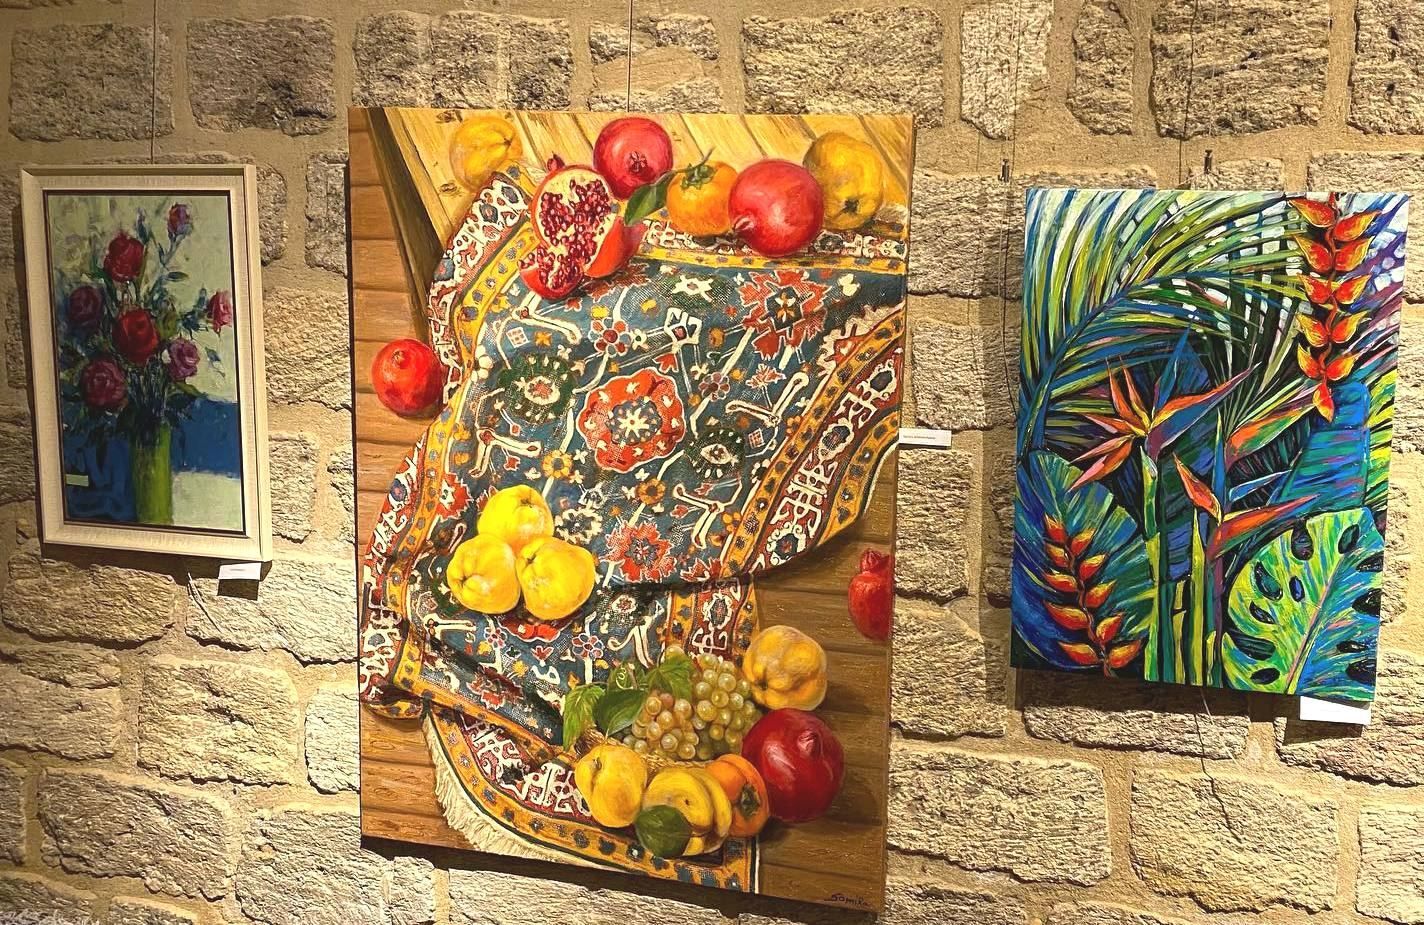 Stunning art pieces on display in Old City [PHOTO] - Gallery Image